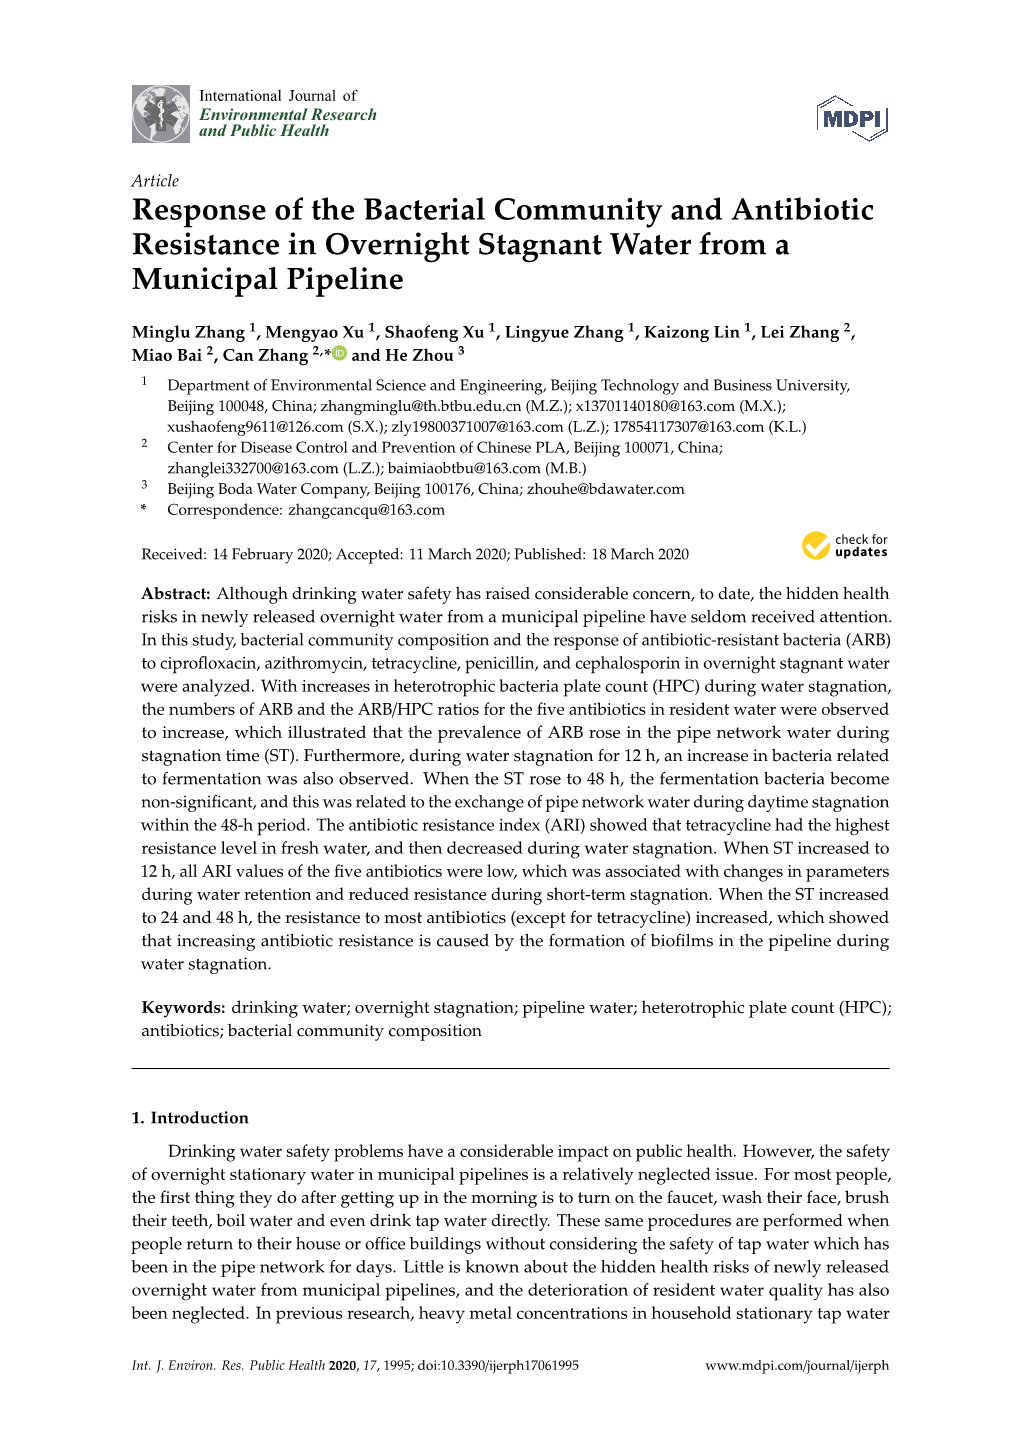 Response of the Bacterial Community and Antibiotic Resistance in Overnight Stagnant Water from a Municipal Pipeline